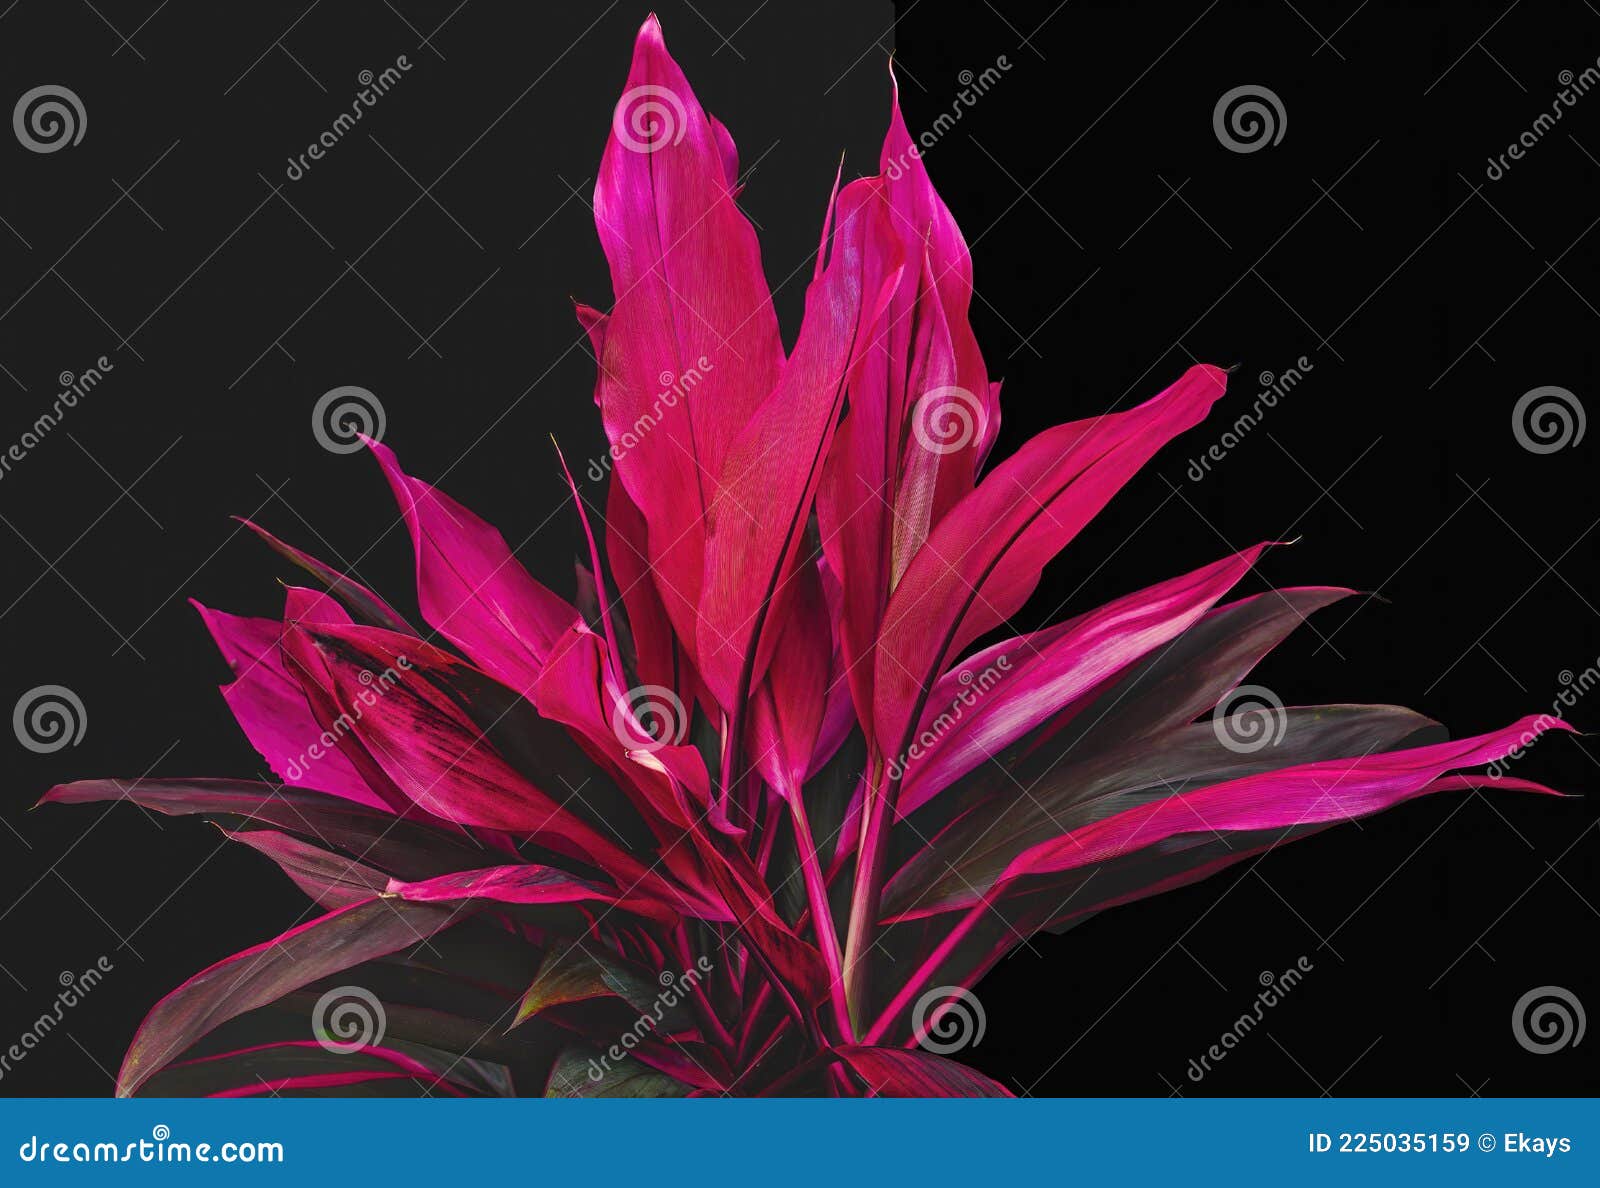 cordyline plant pink stems and leaves